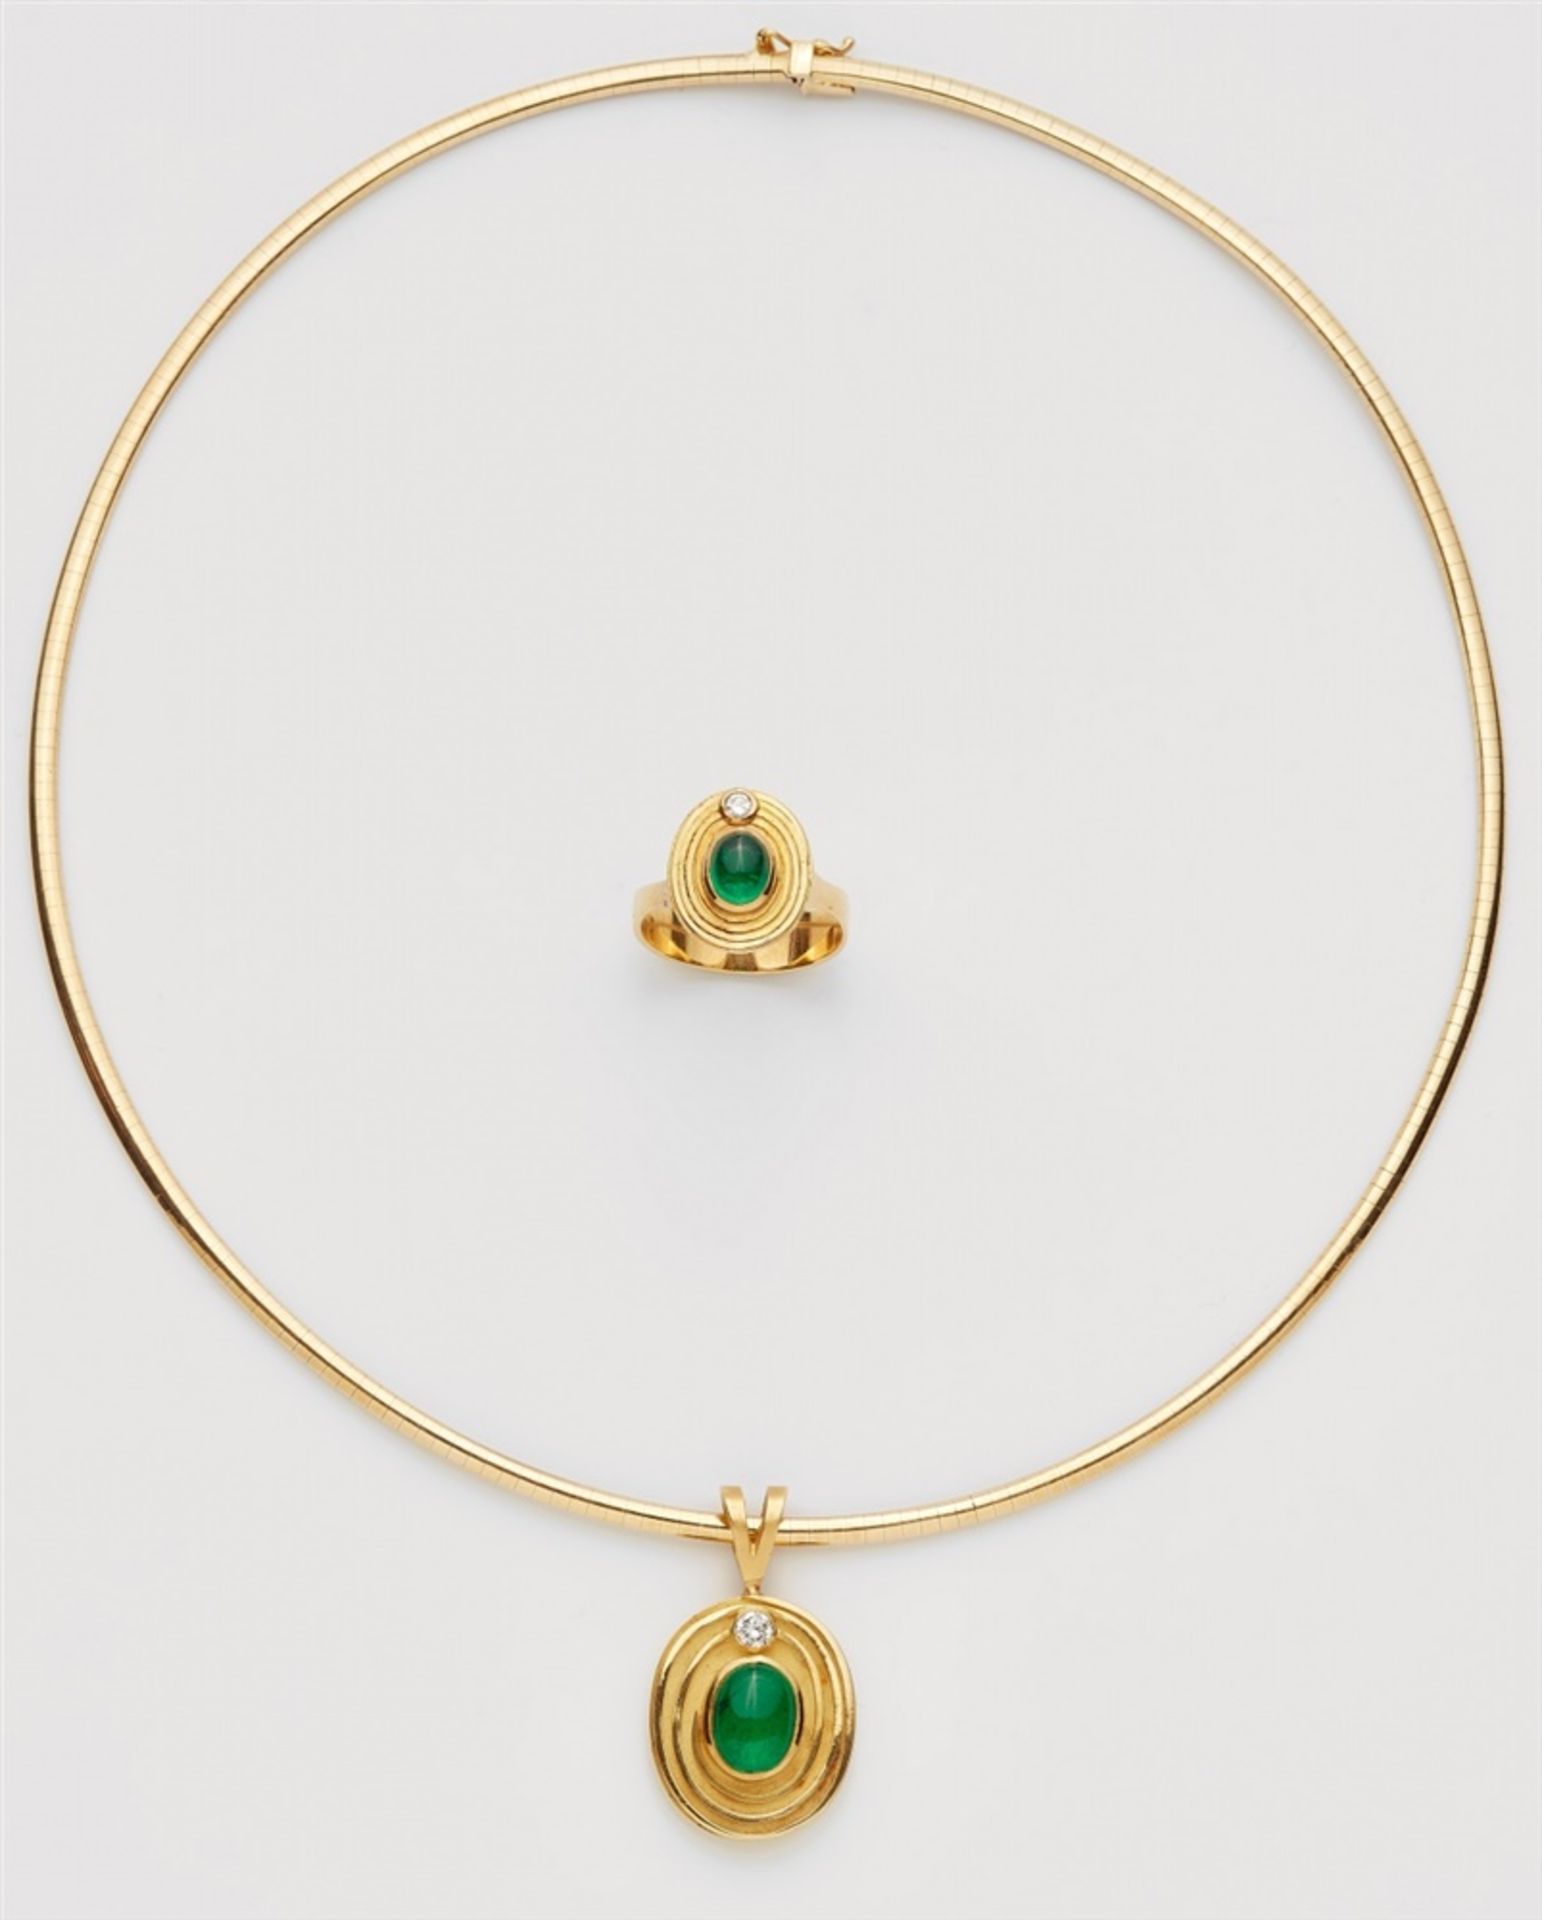 An 18k gold and emerald pendant and ringForged gold pendant and ring decorated in relief. The